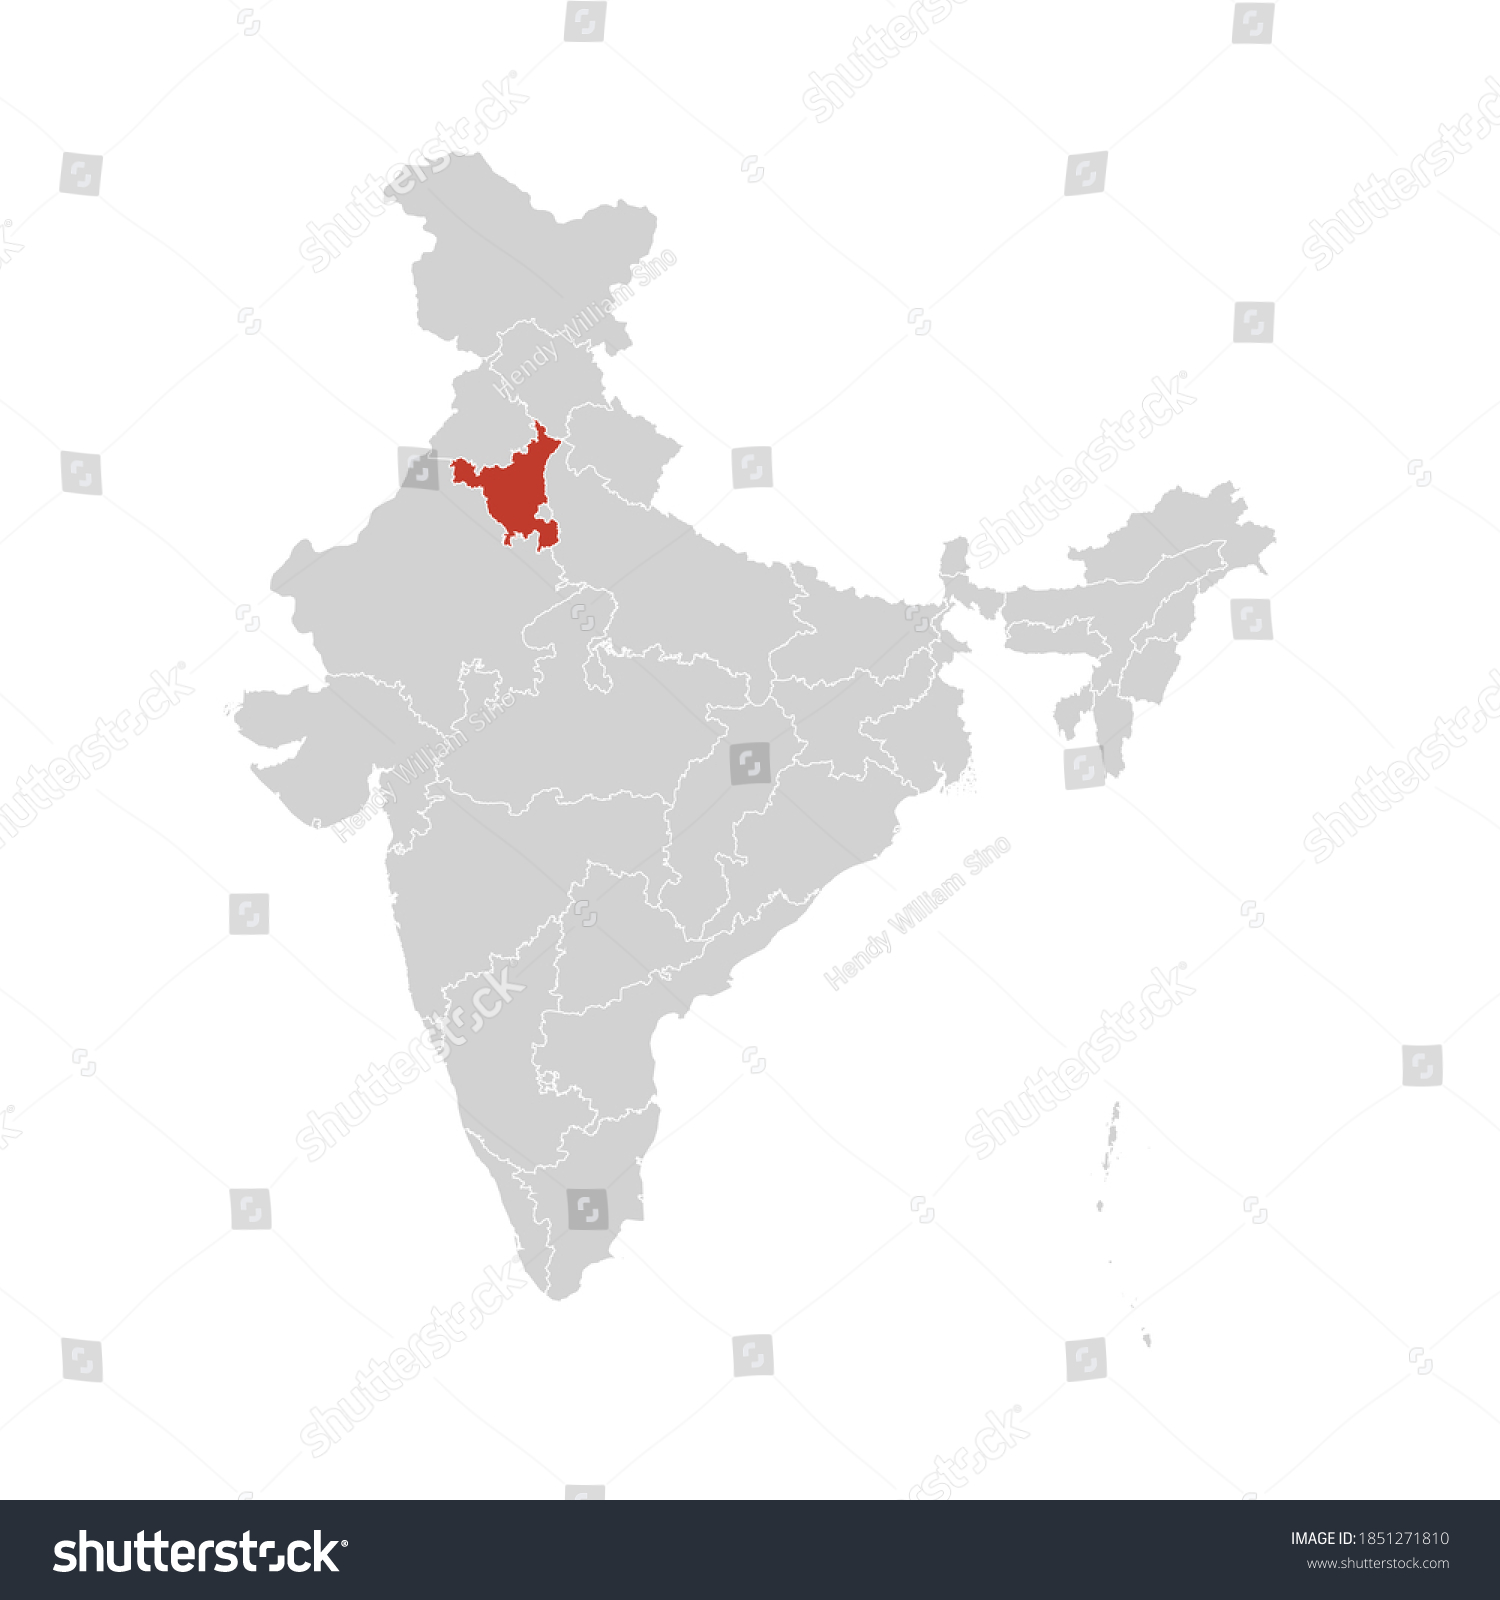 Haryana On India Map Haryana Highlighted On India Map Eps Stock Vector (Royalty Free) 1851271810  | Shutterstock